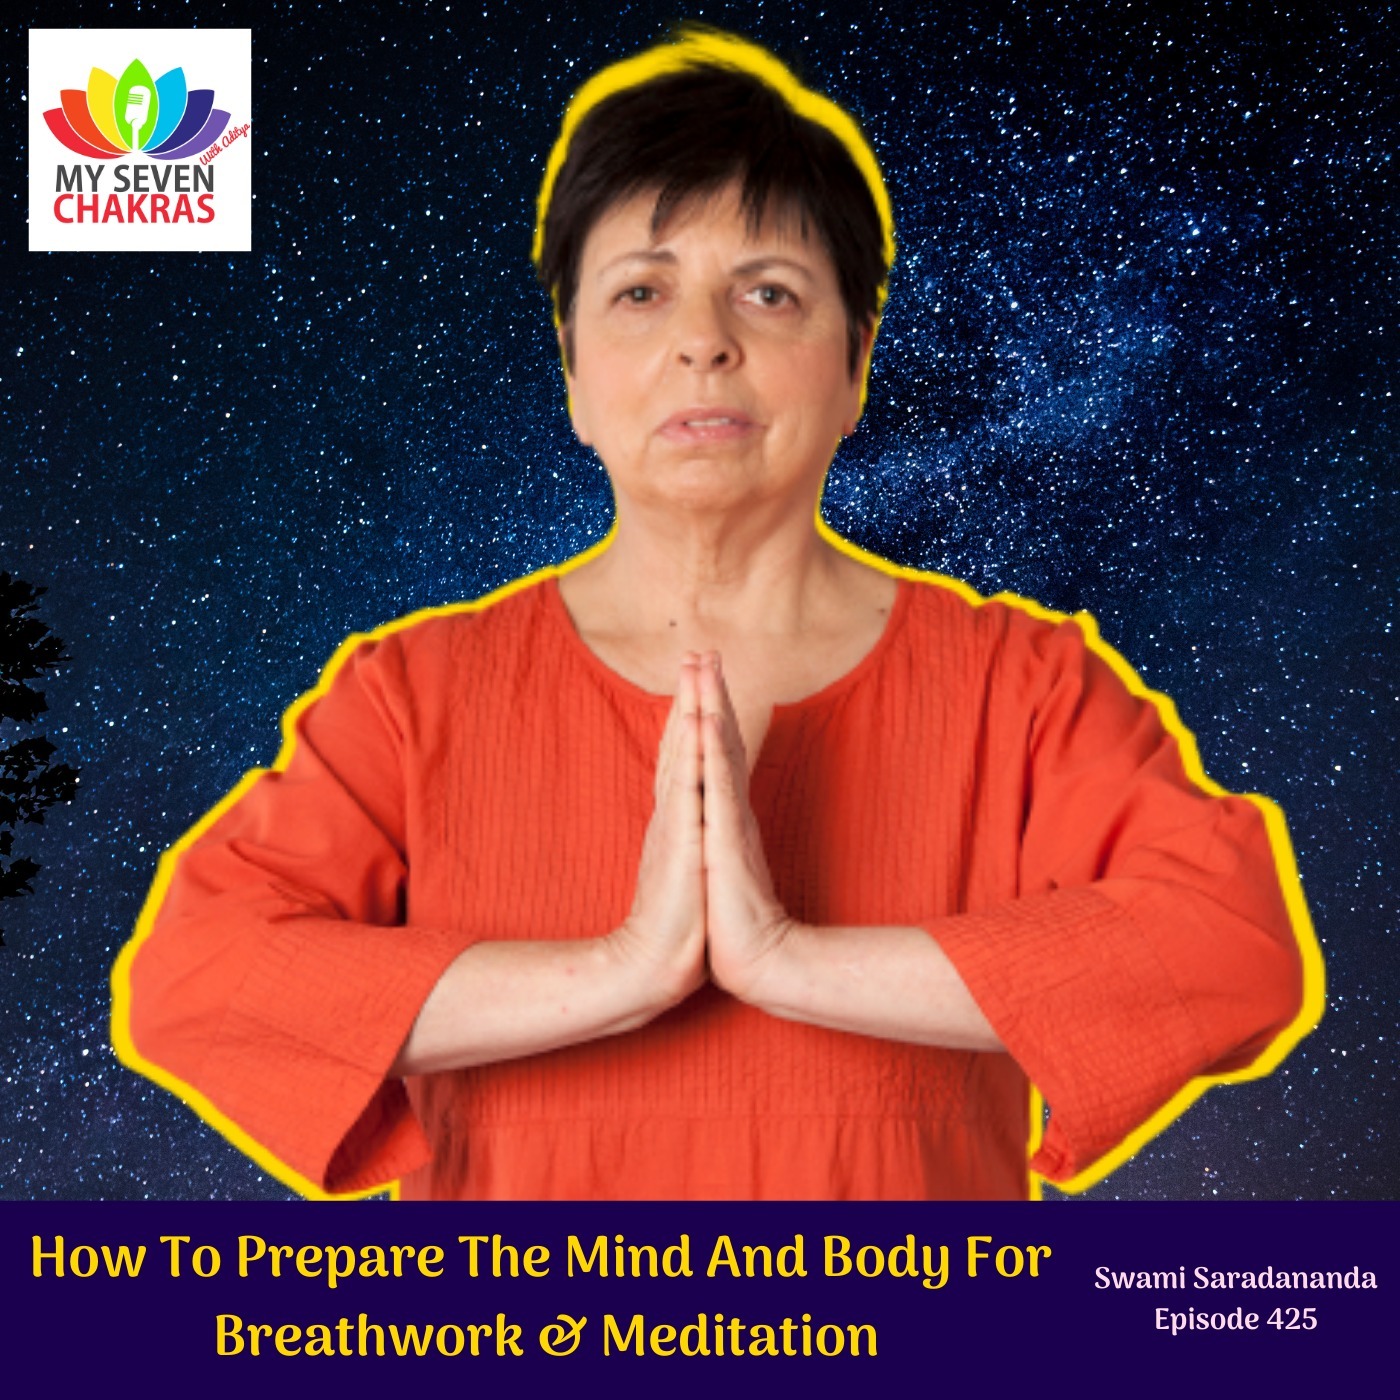 How To Prepare The Mind And Body For Meditation & Breathwork With Swami Saradananda